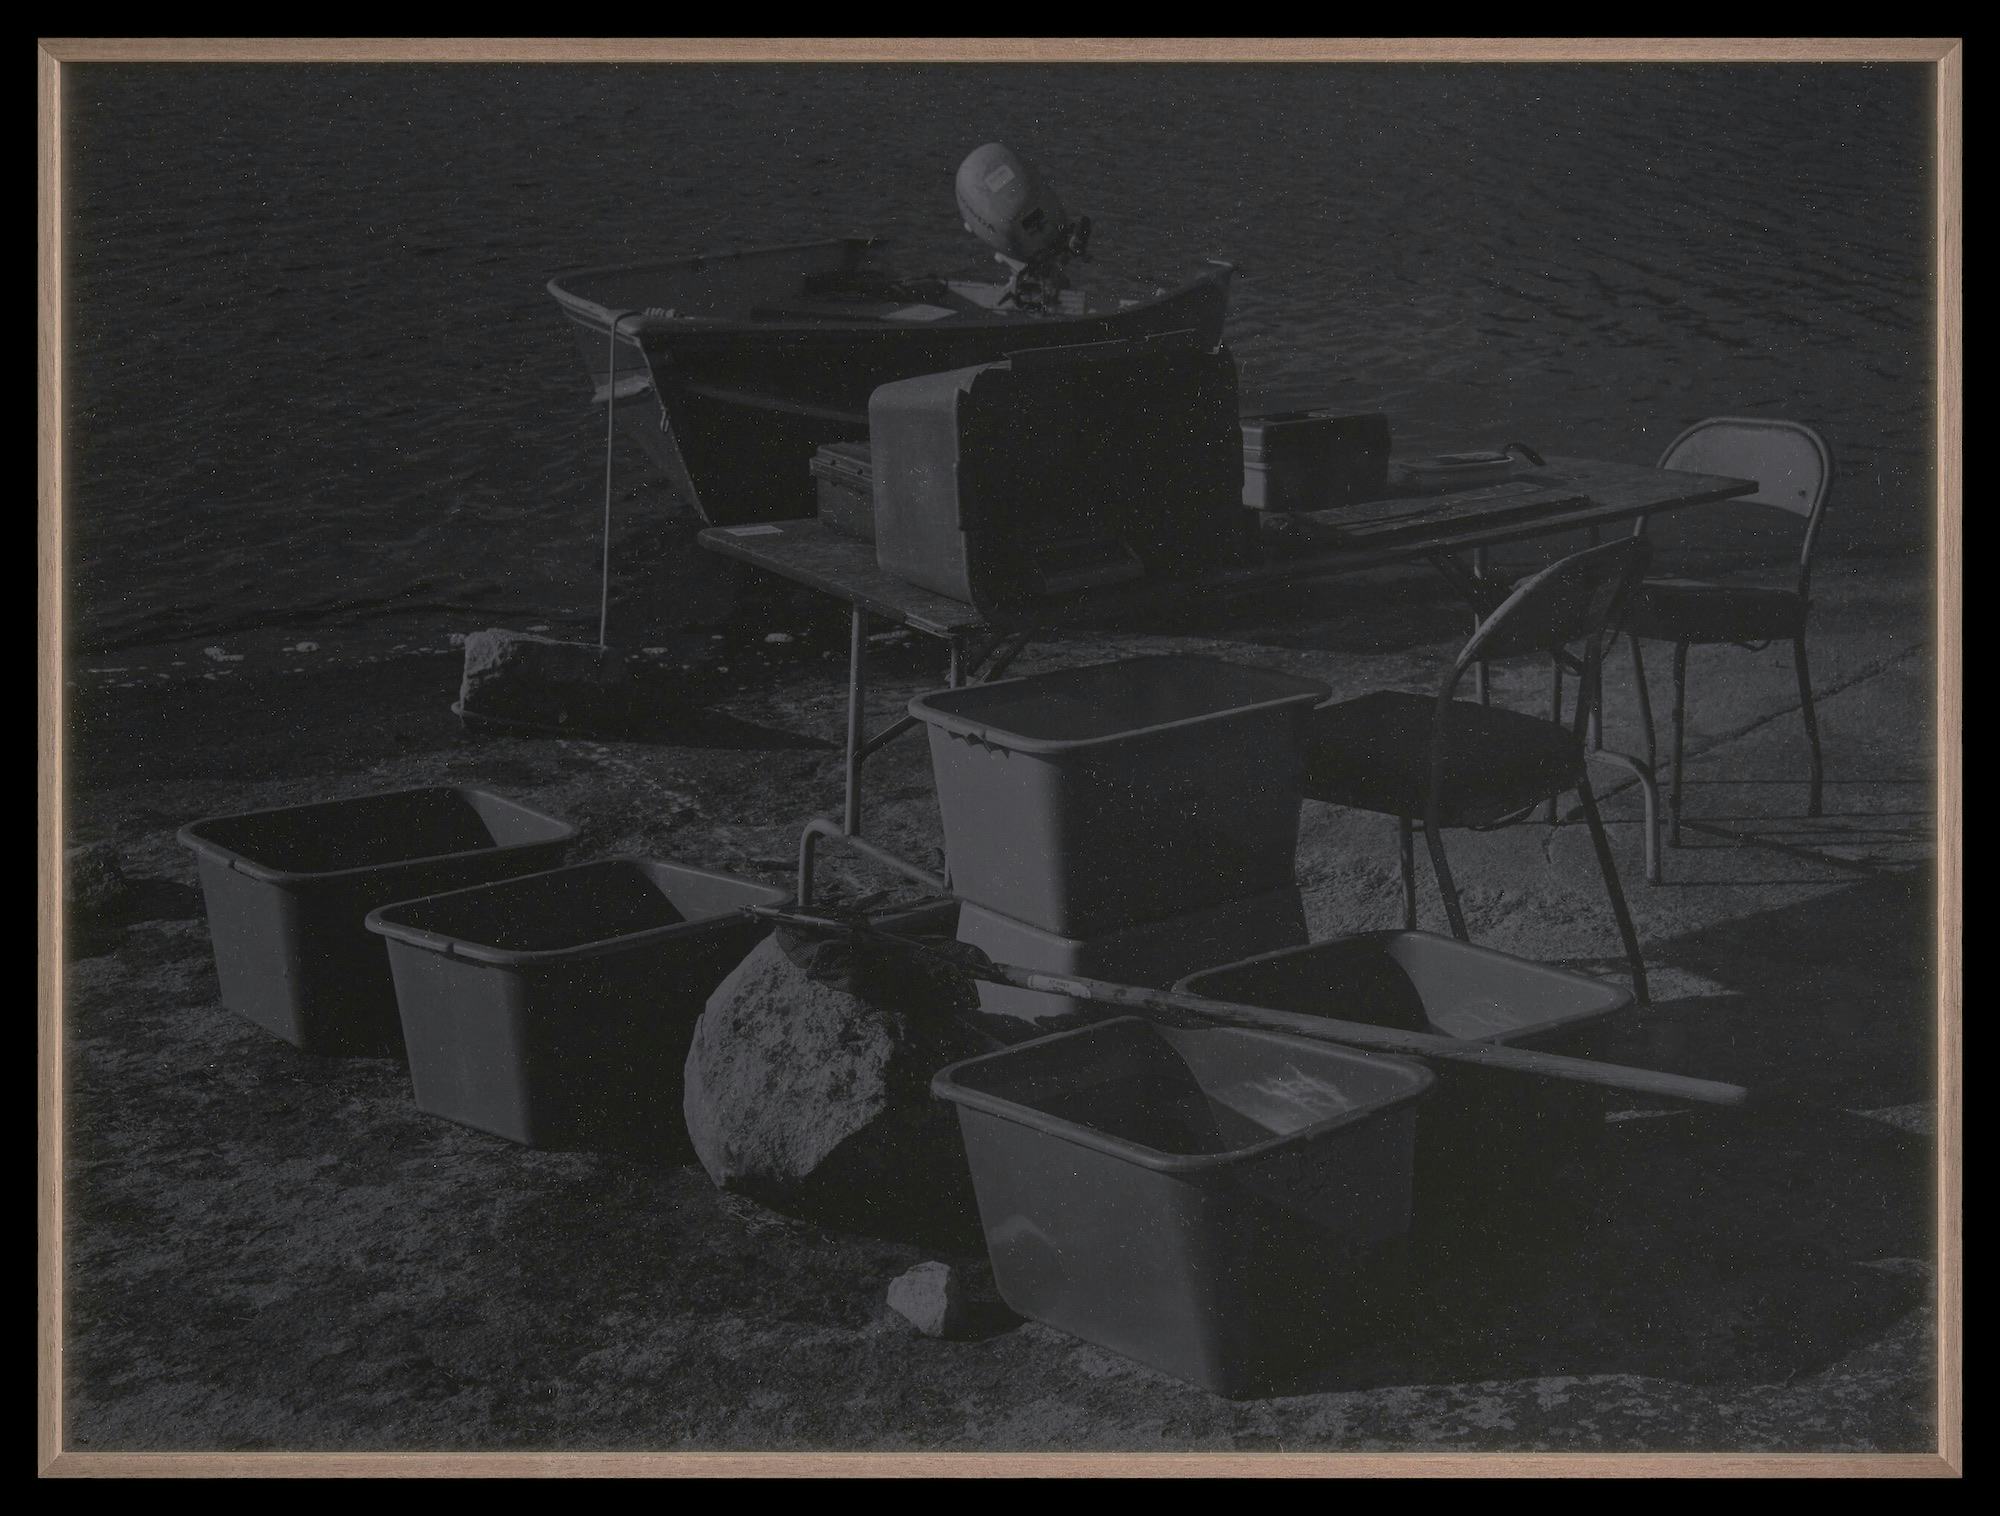 Dark picture of a table next to the lake. The table is surrounded by few objects such as chairs, pots and shovel